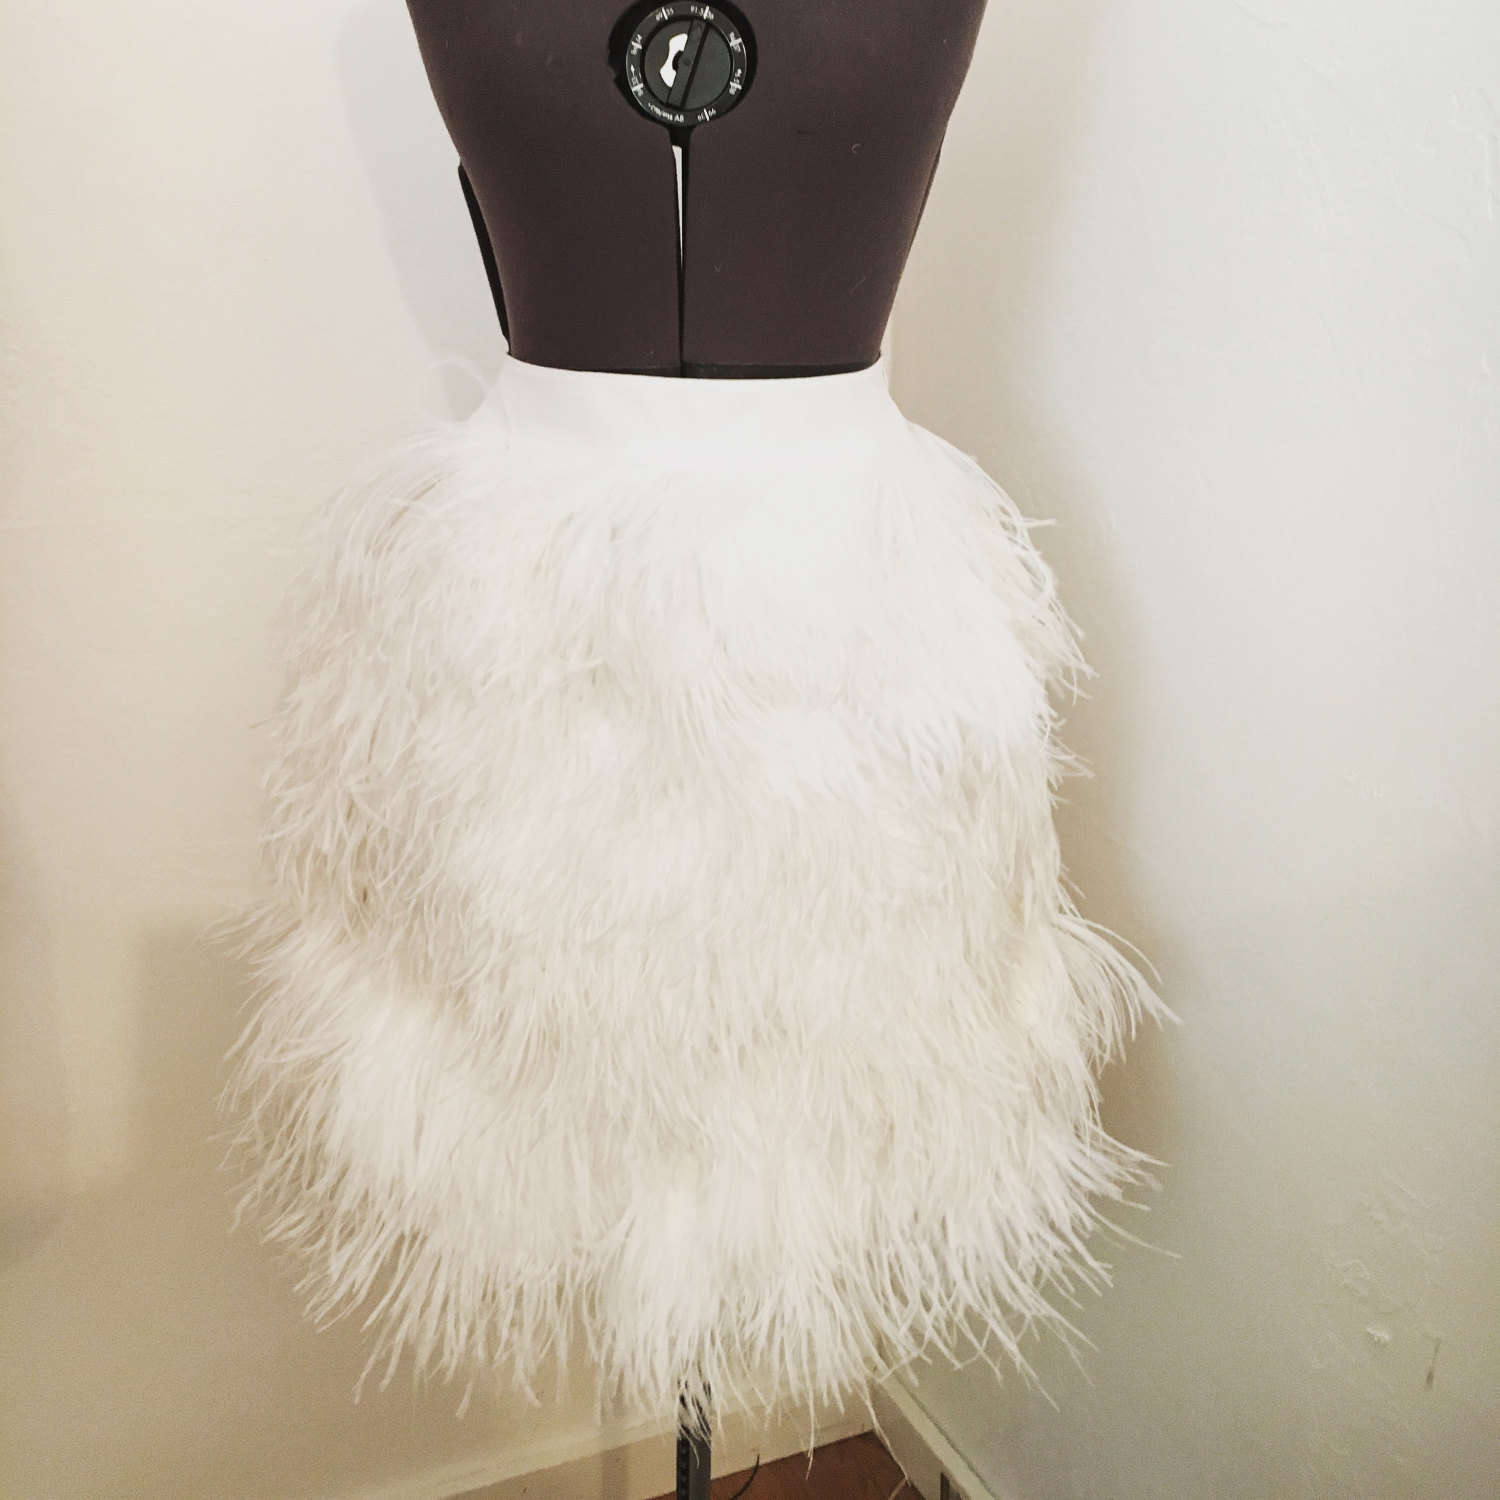 Custom Couture White Wedding Ostrich Feather Skirt